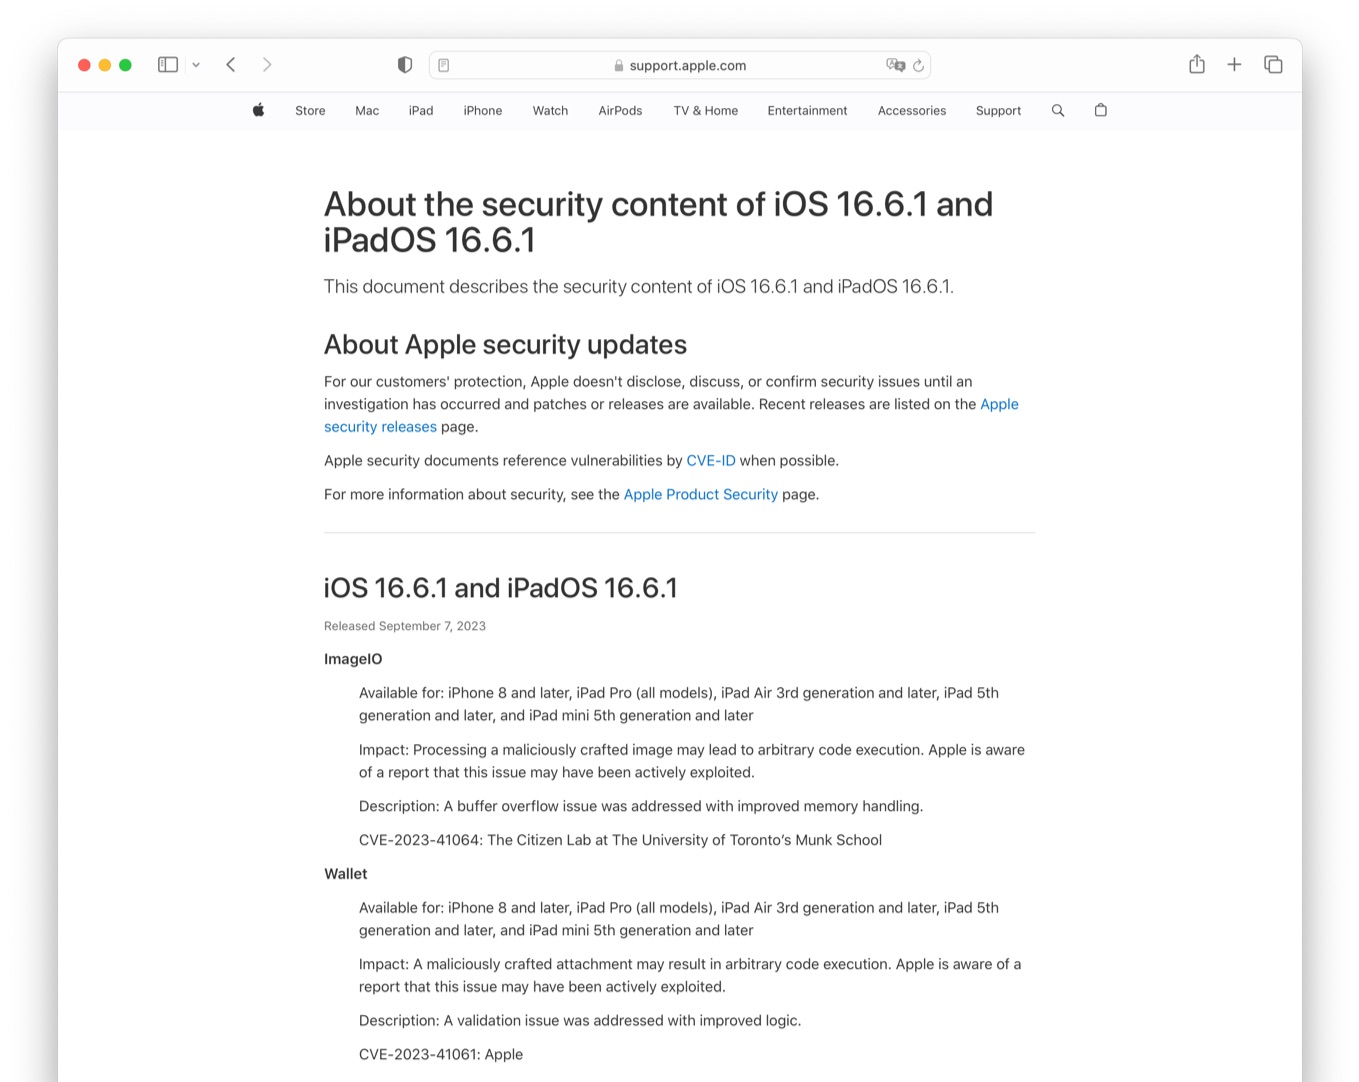 About the security content of iOS 16.6.1 and iPadOS 16.6.1